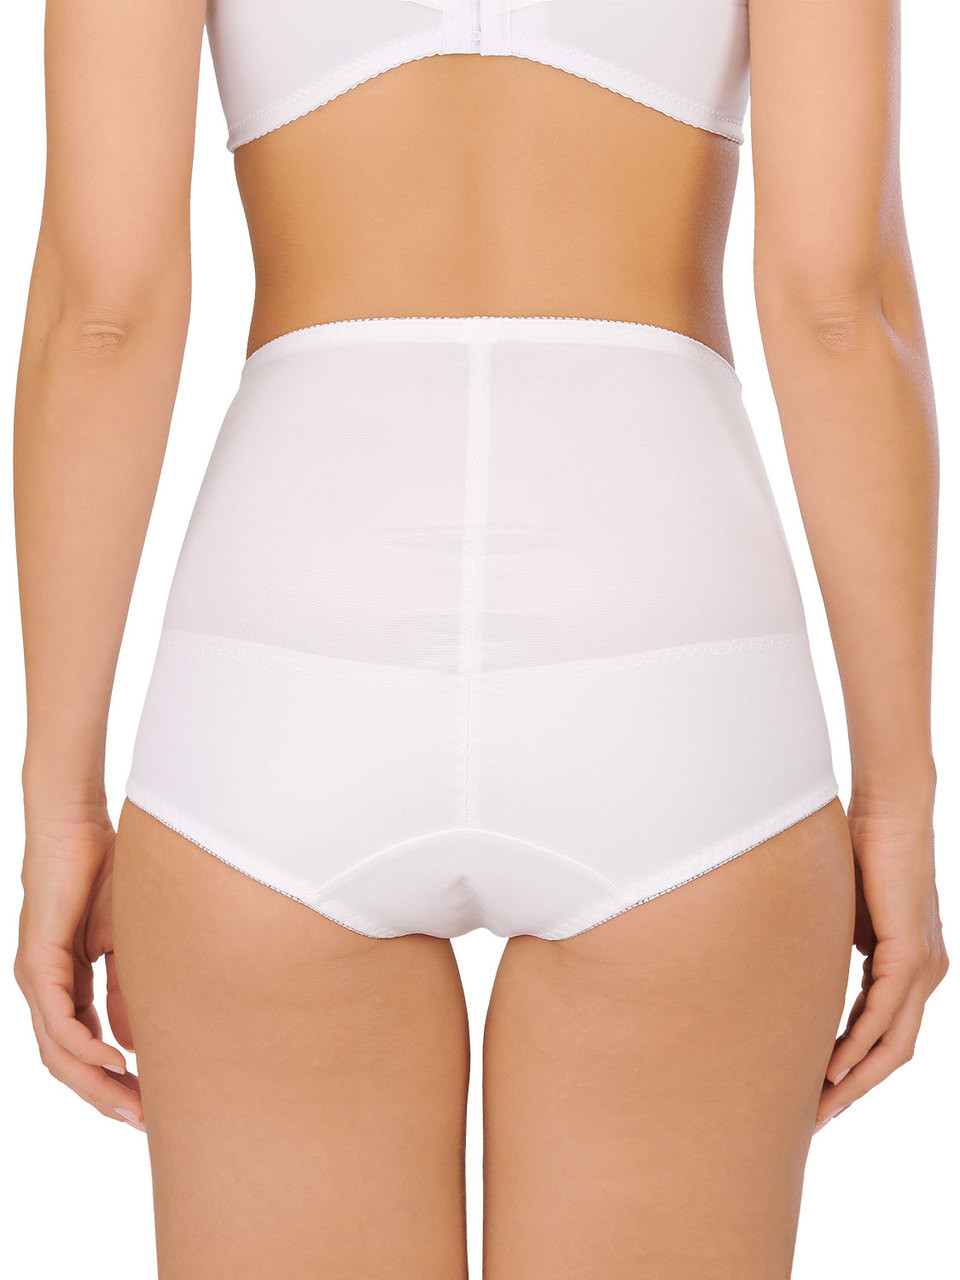 Panty Girdle With Reinforced Front Panel High Rise Firm Control (L-5XL) by  Naturana 0184